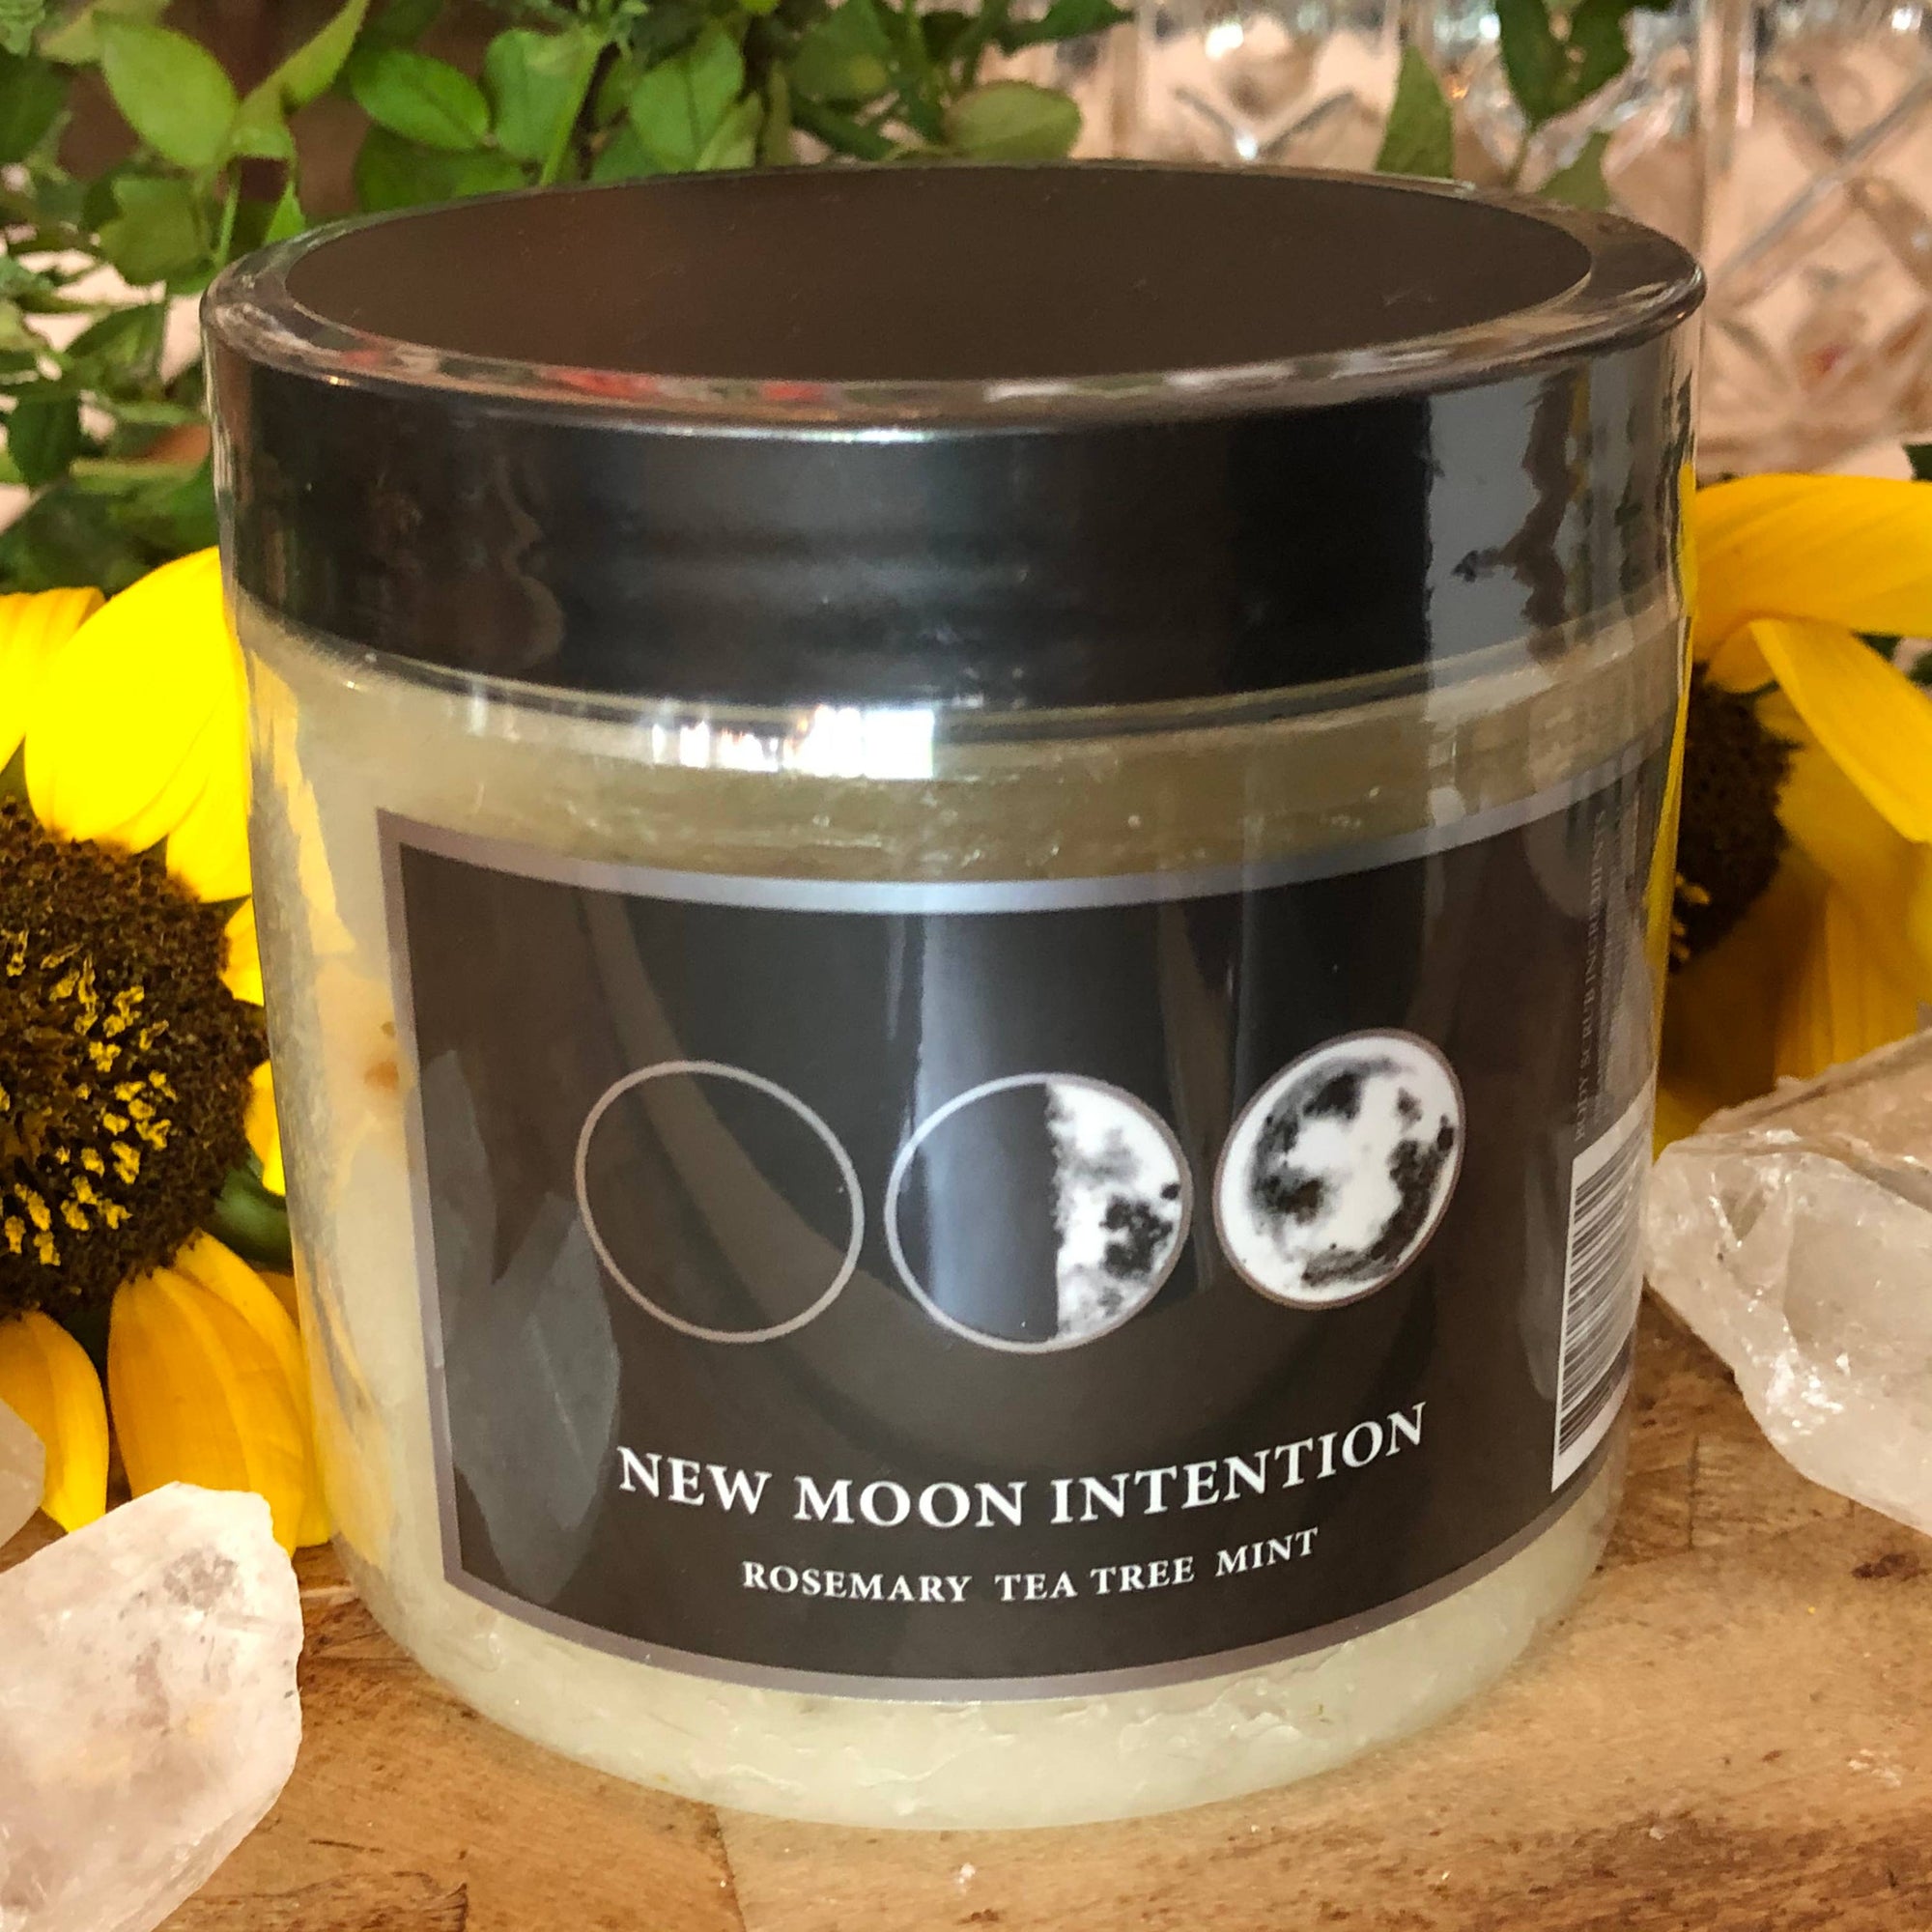 New Moon Intention Bath Salt with Charged Crystal